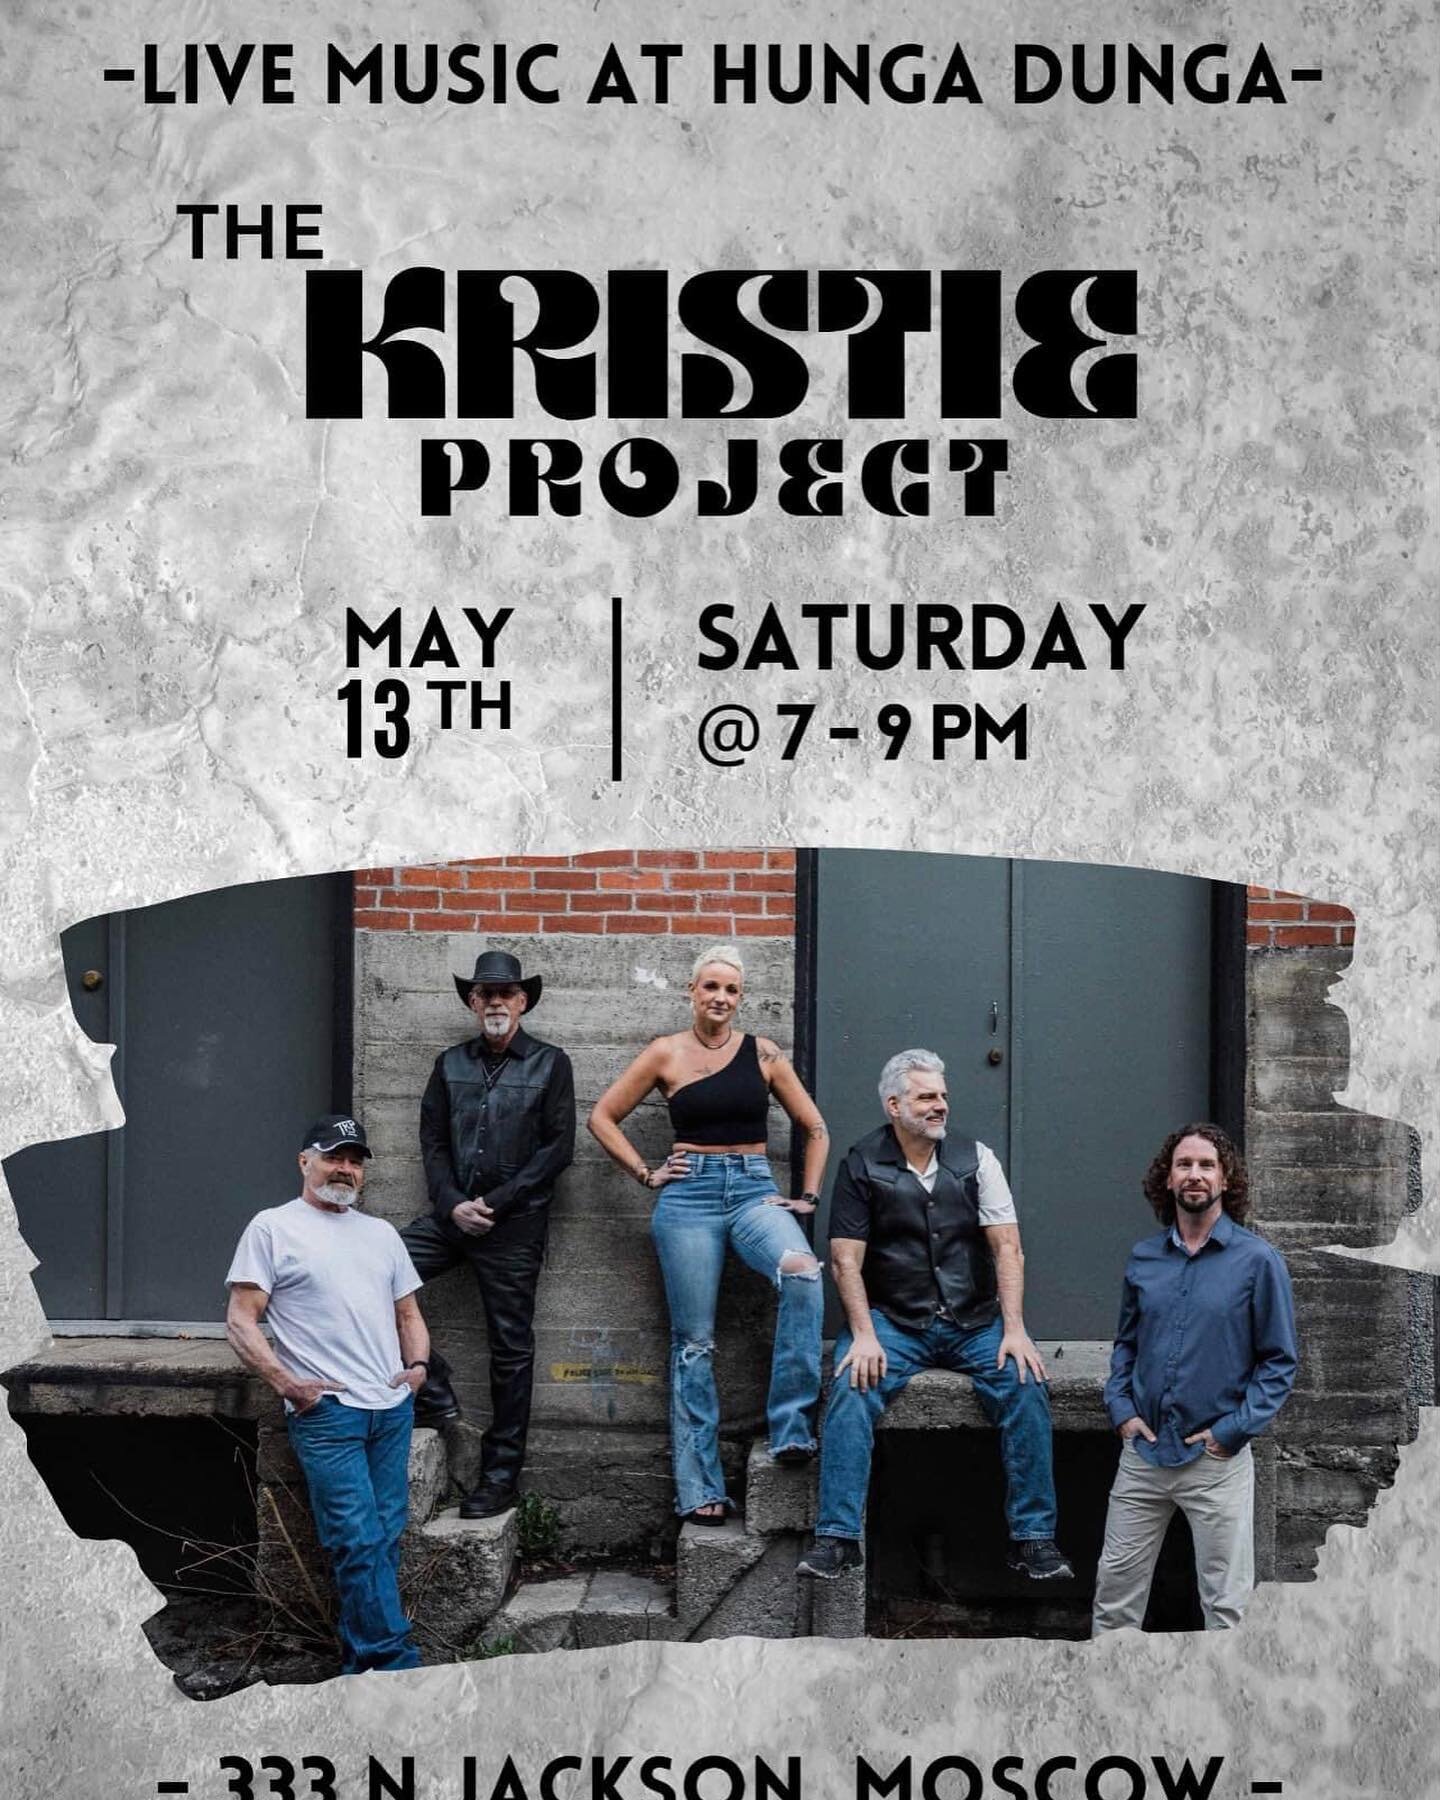 The Kristie Project plays this Saturday! Music starts at 7pm🍻